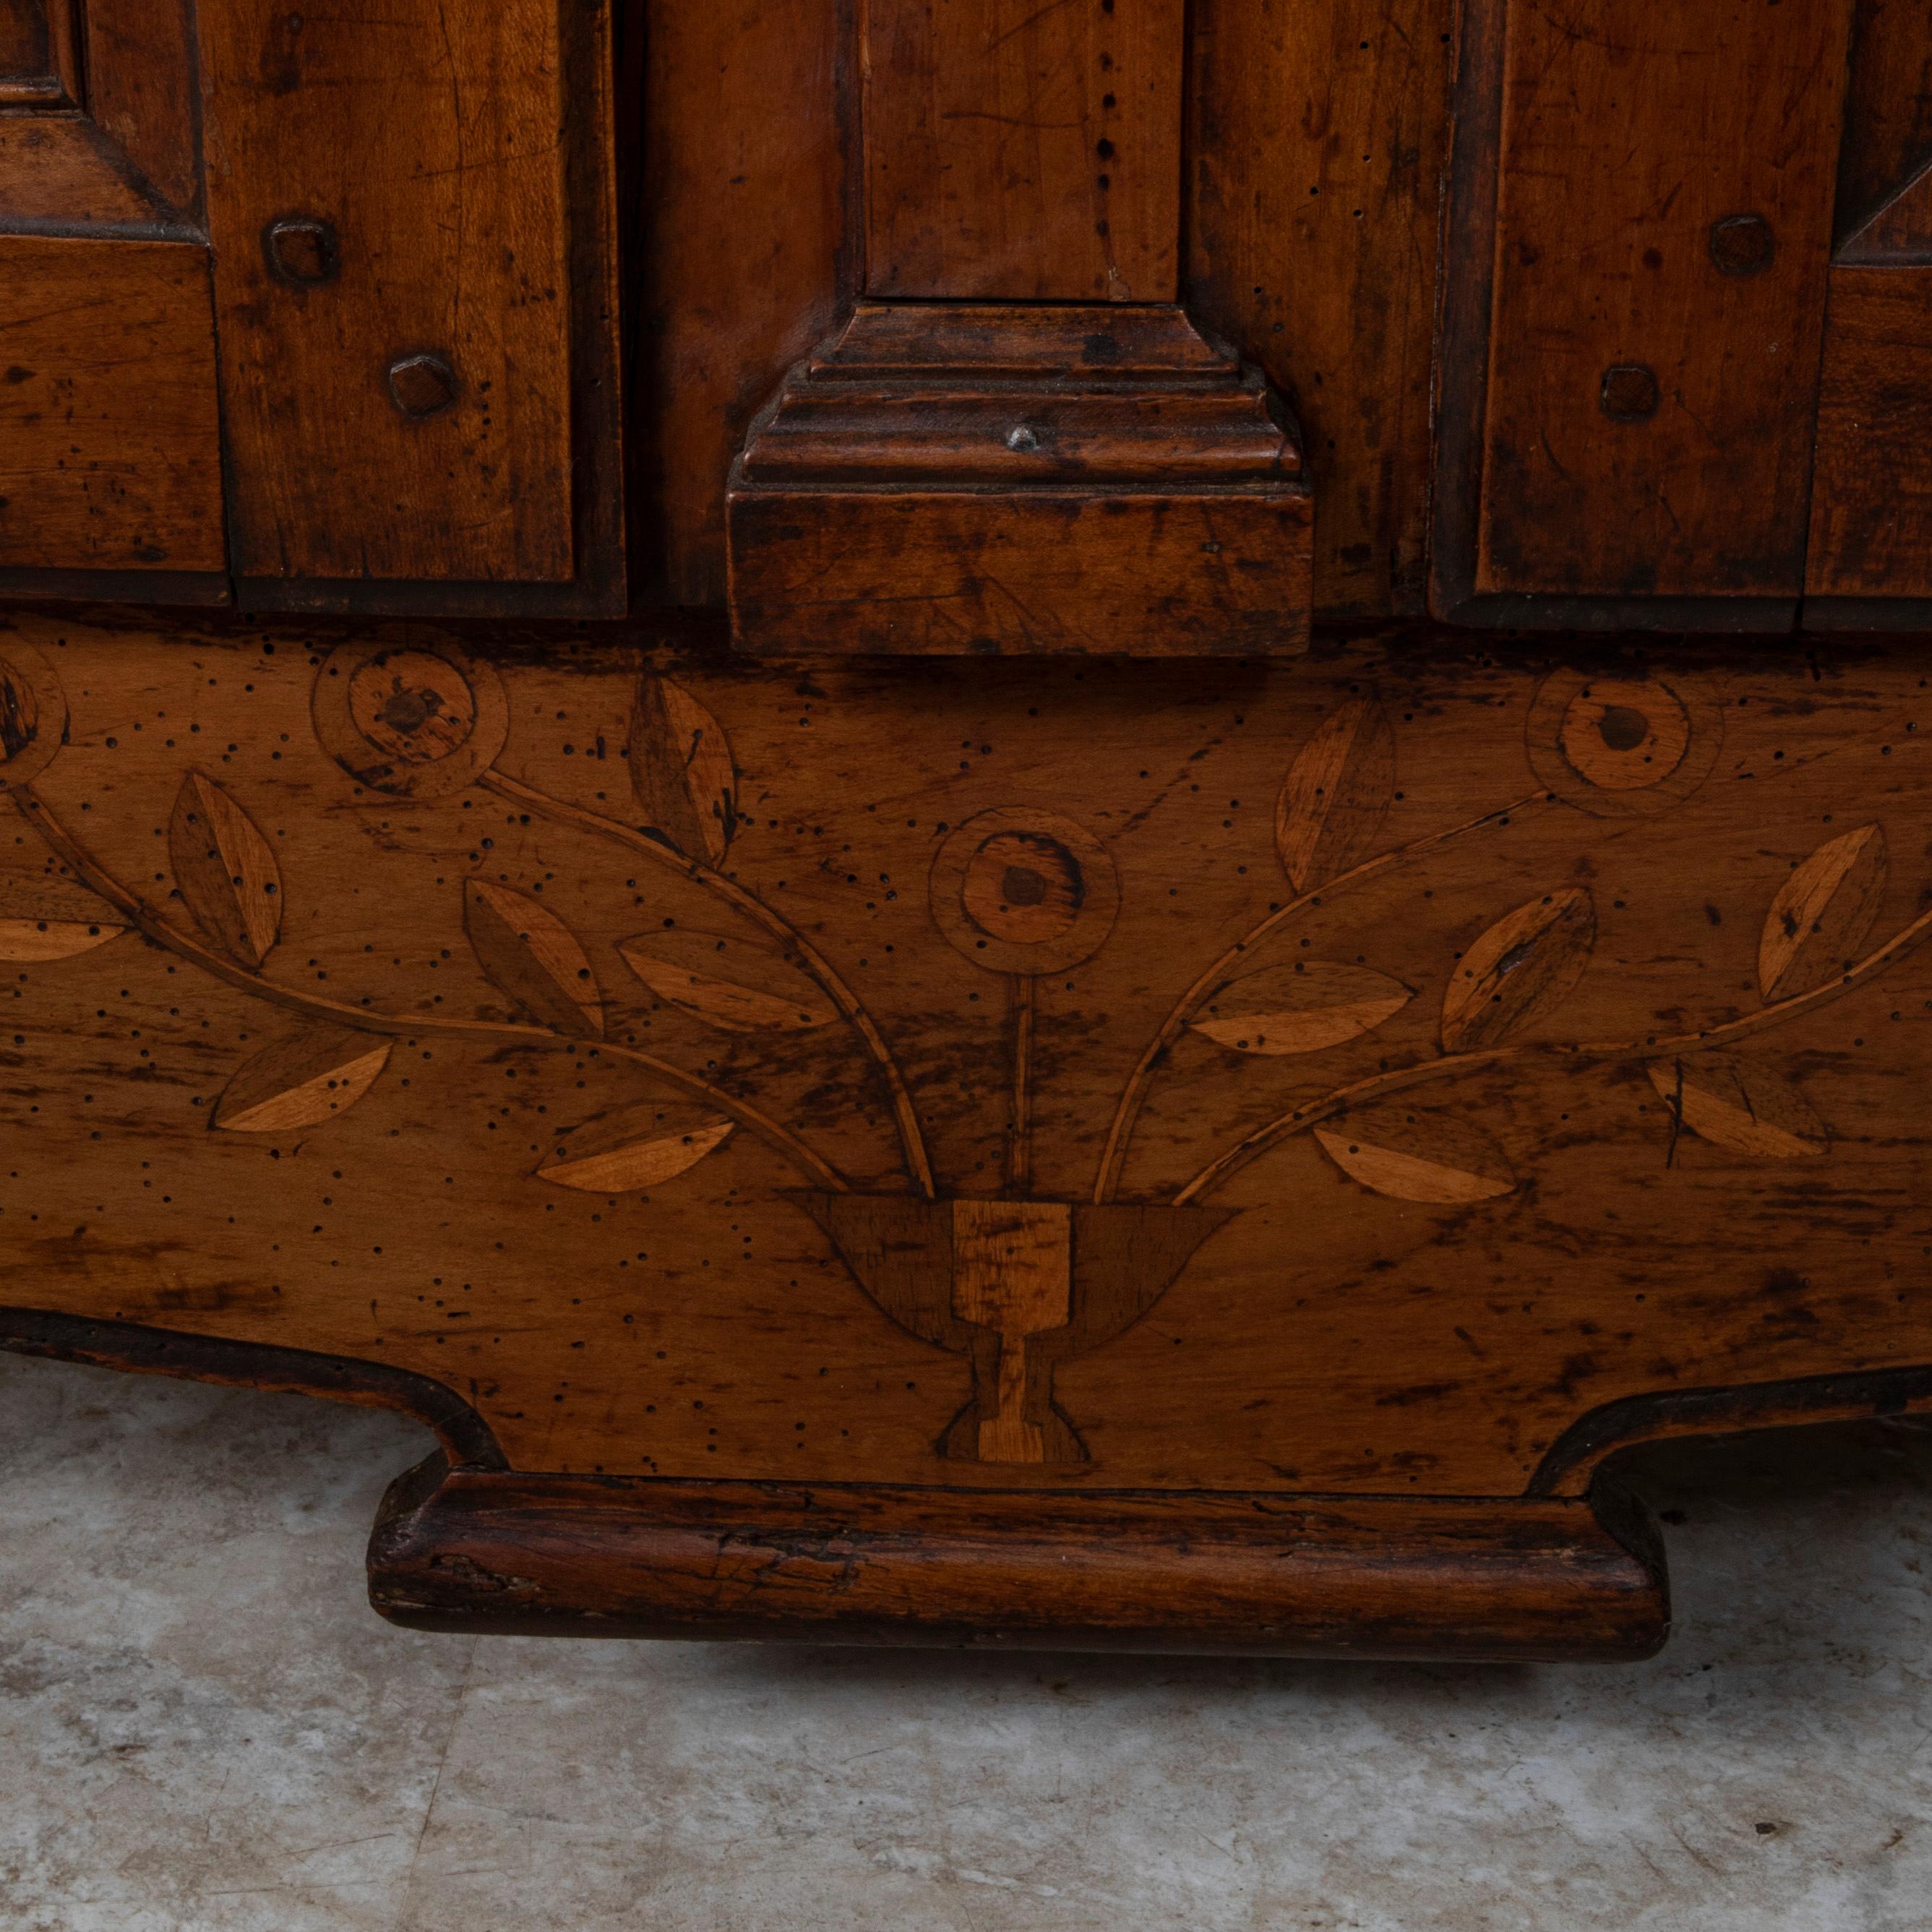 Early 19th Century French Walnut Buffet with Marquetry From the Dordogne Region For Sale 6